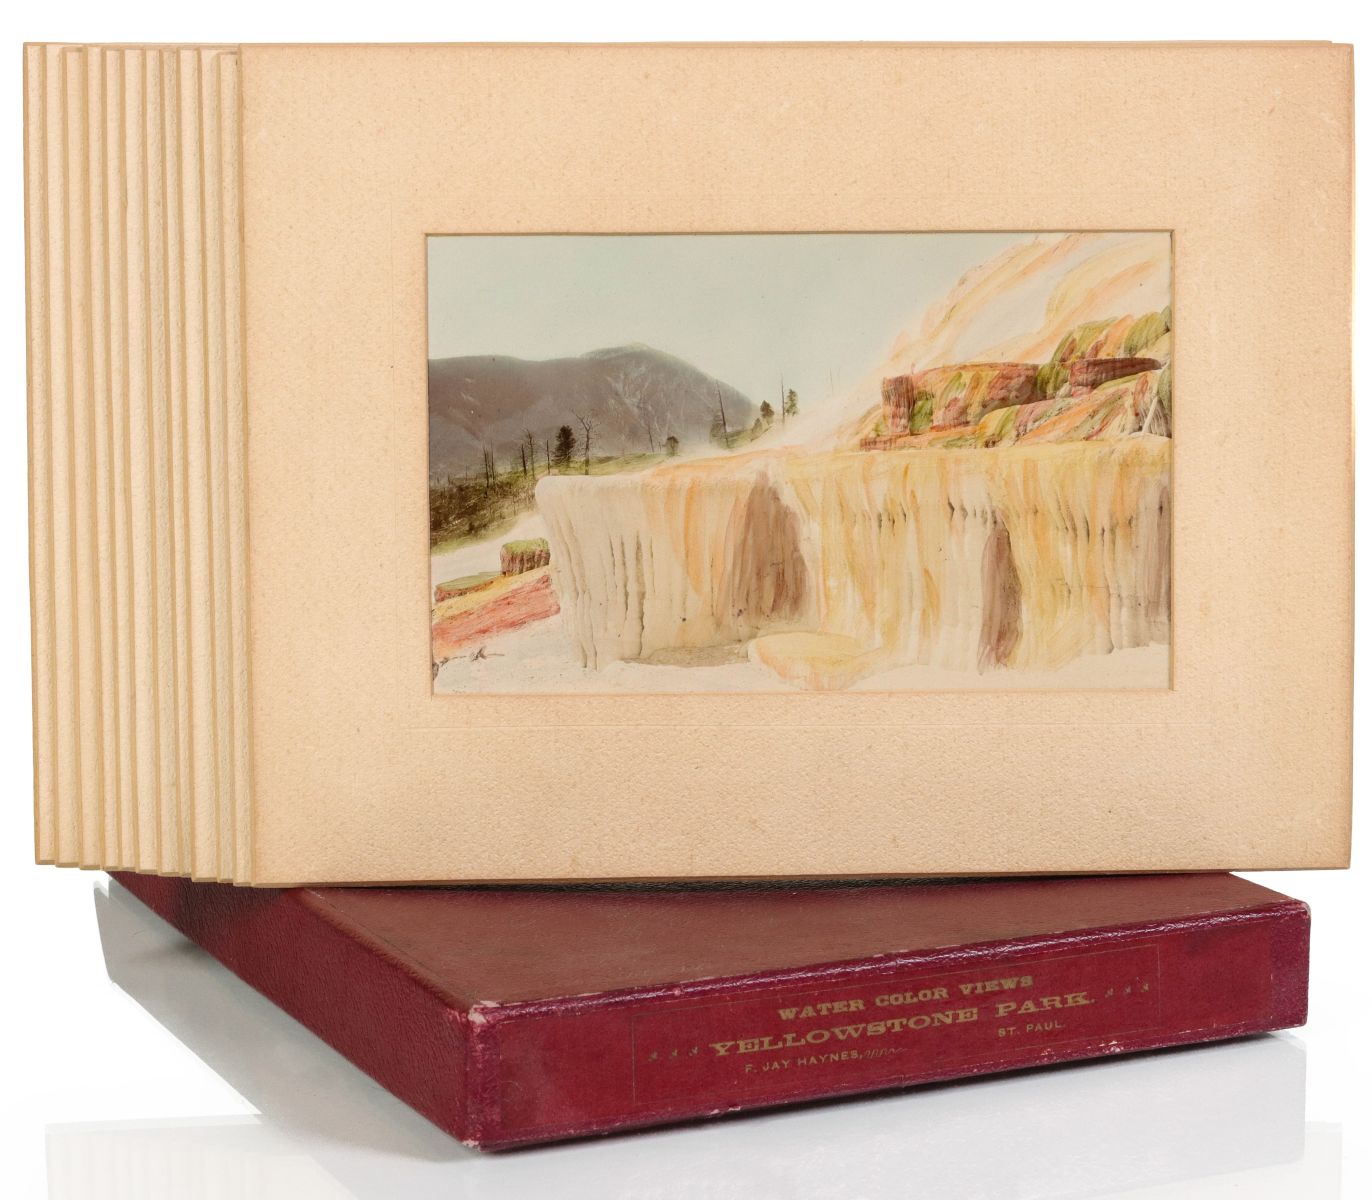 F. JAY HAYNES WATER COLOR PHOTOGRAPHS YELLOWSTONE PARK